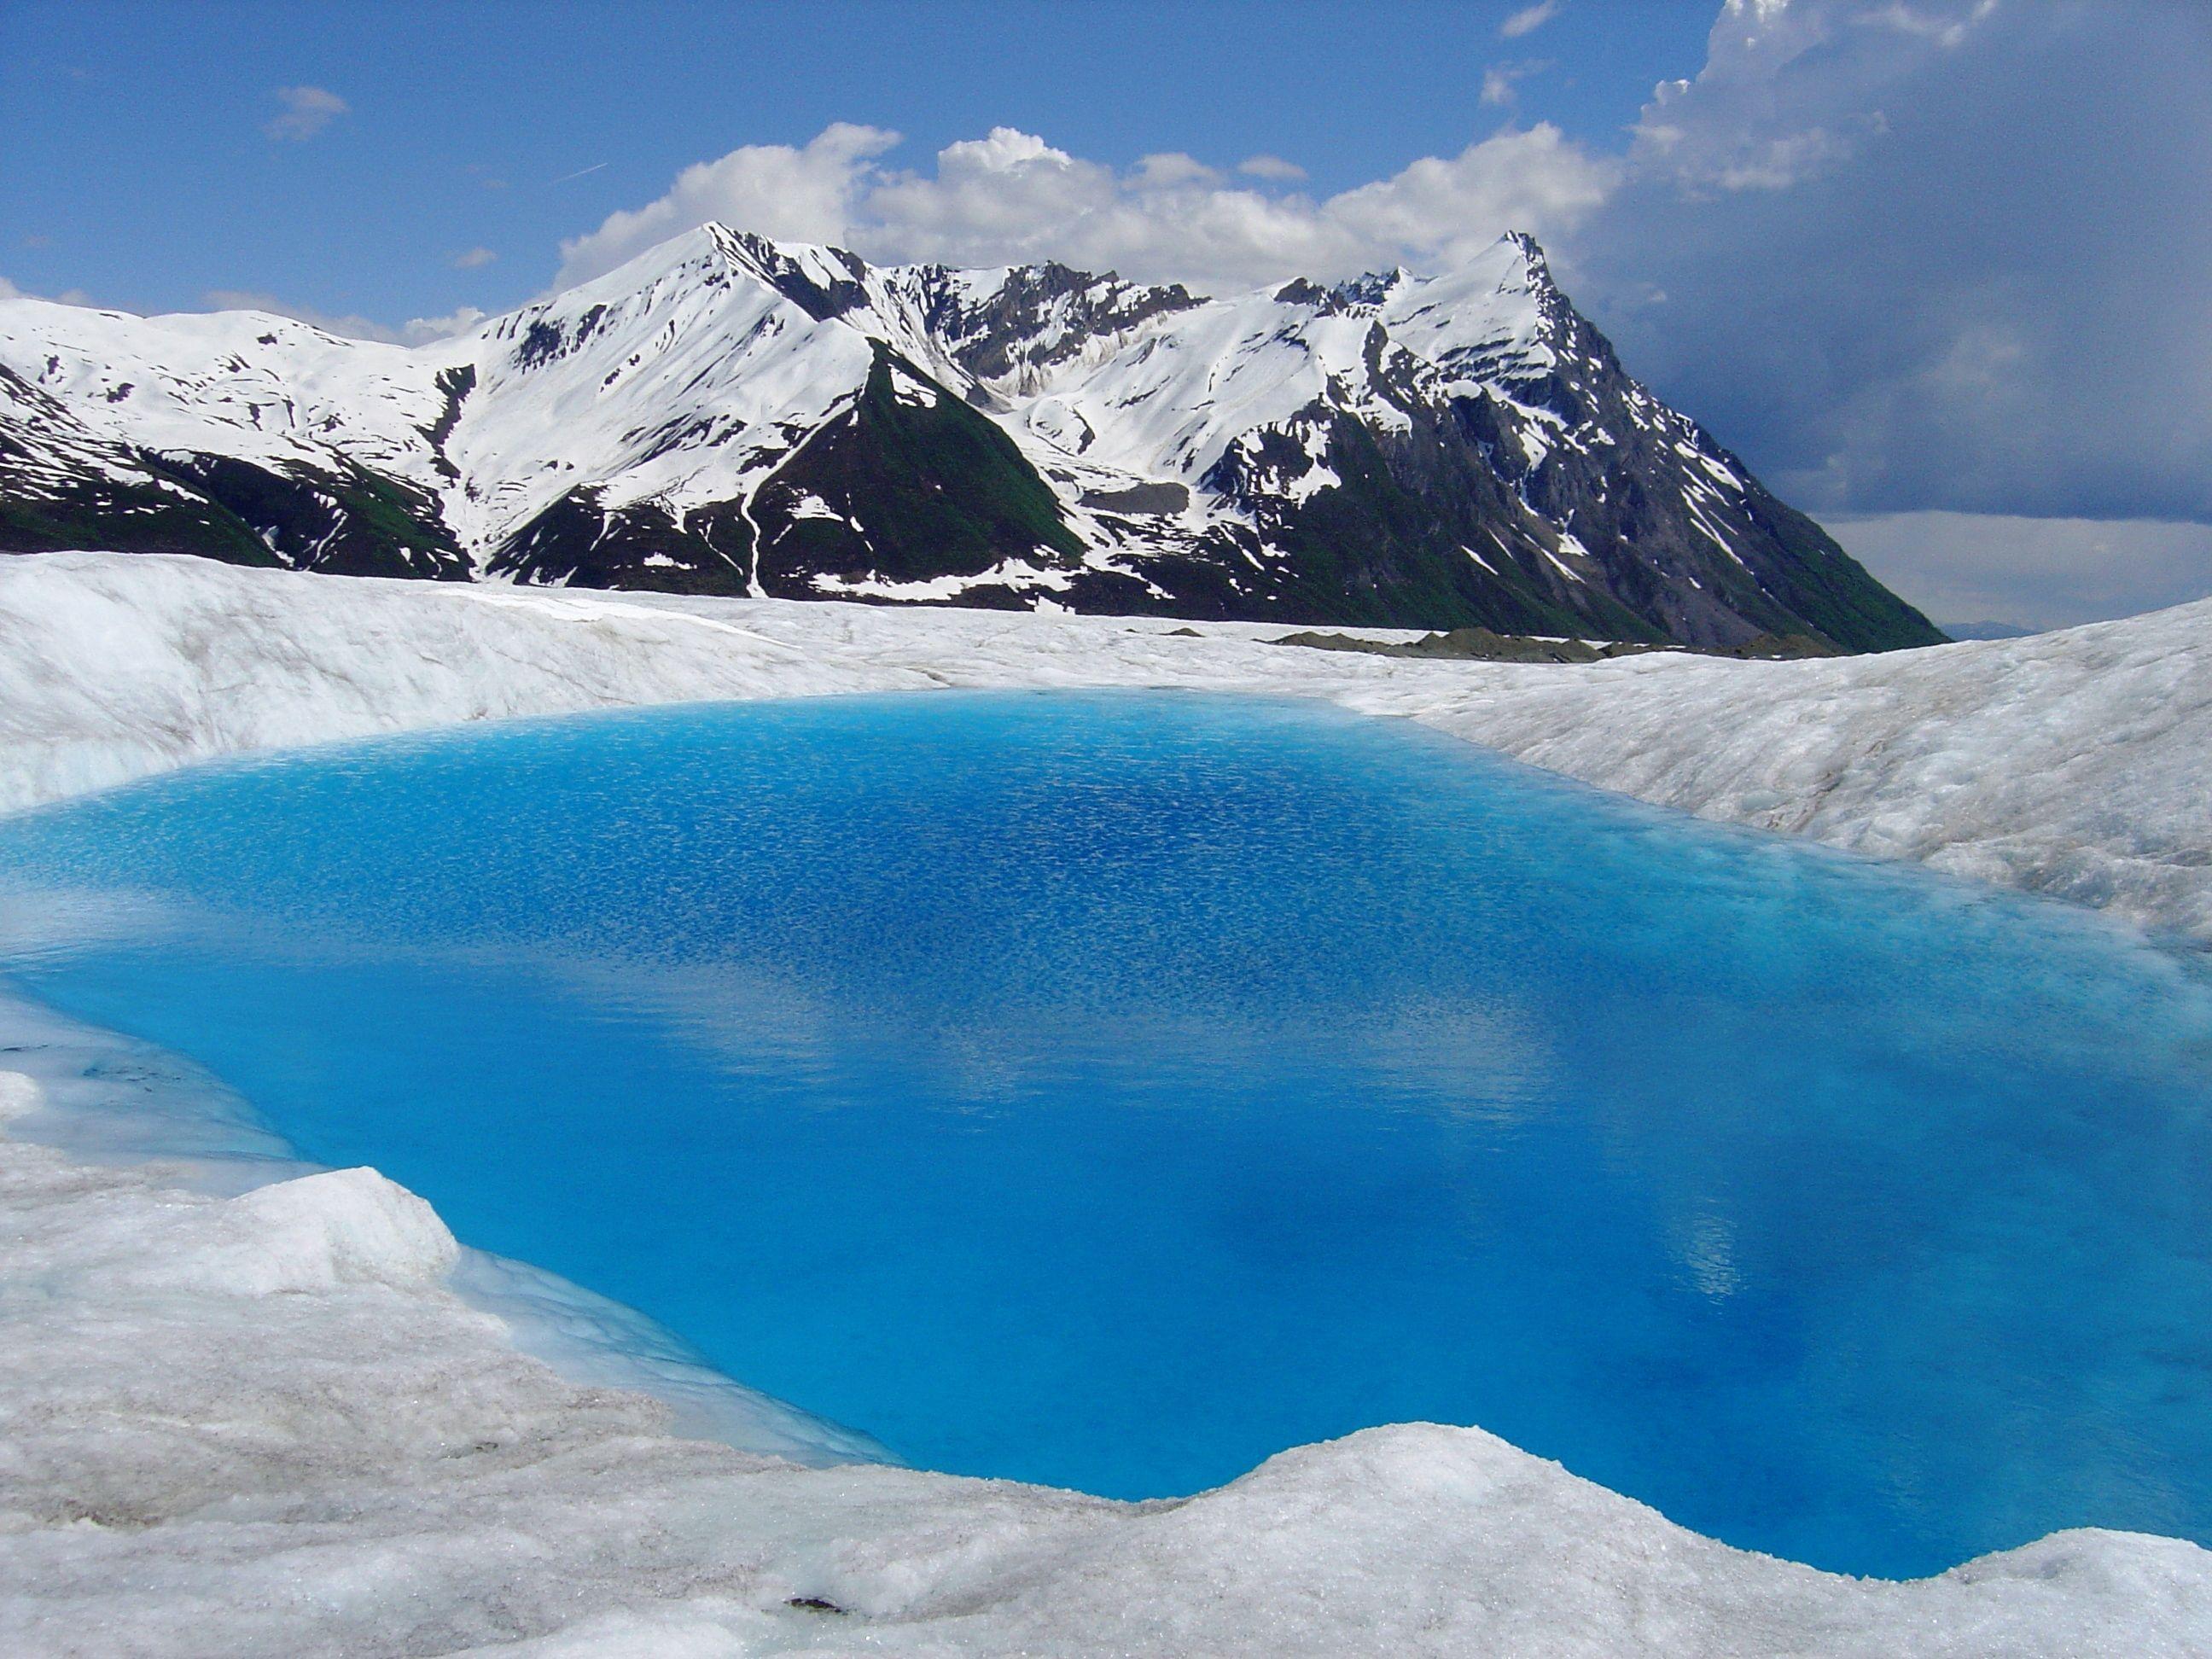 Blue Glacial Pool In Wrangell St. Elias National Park